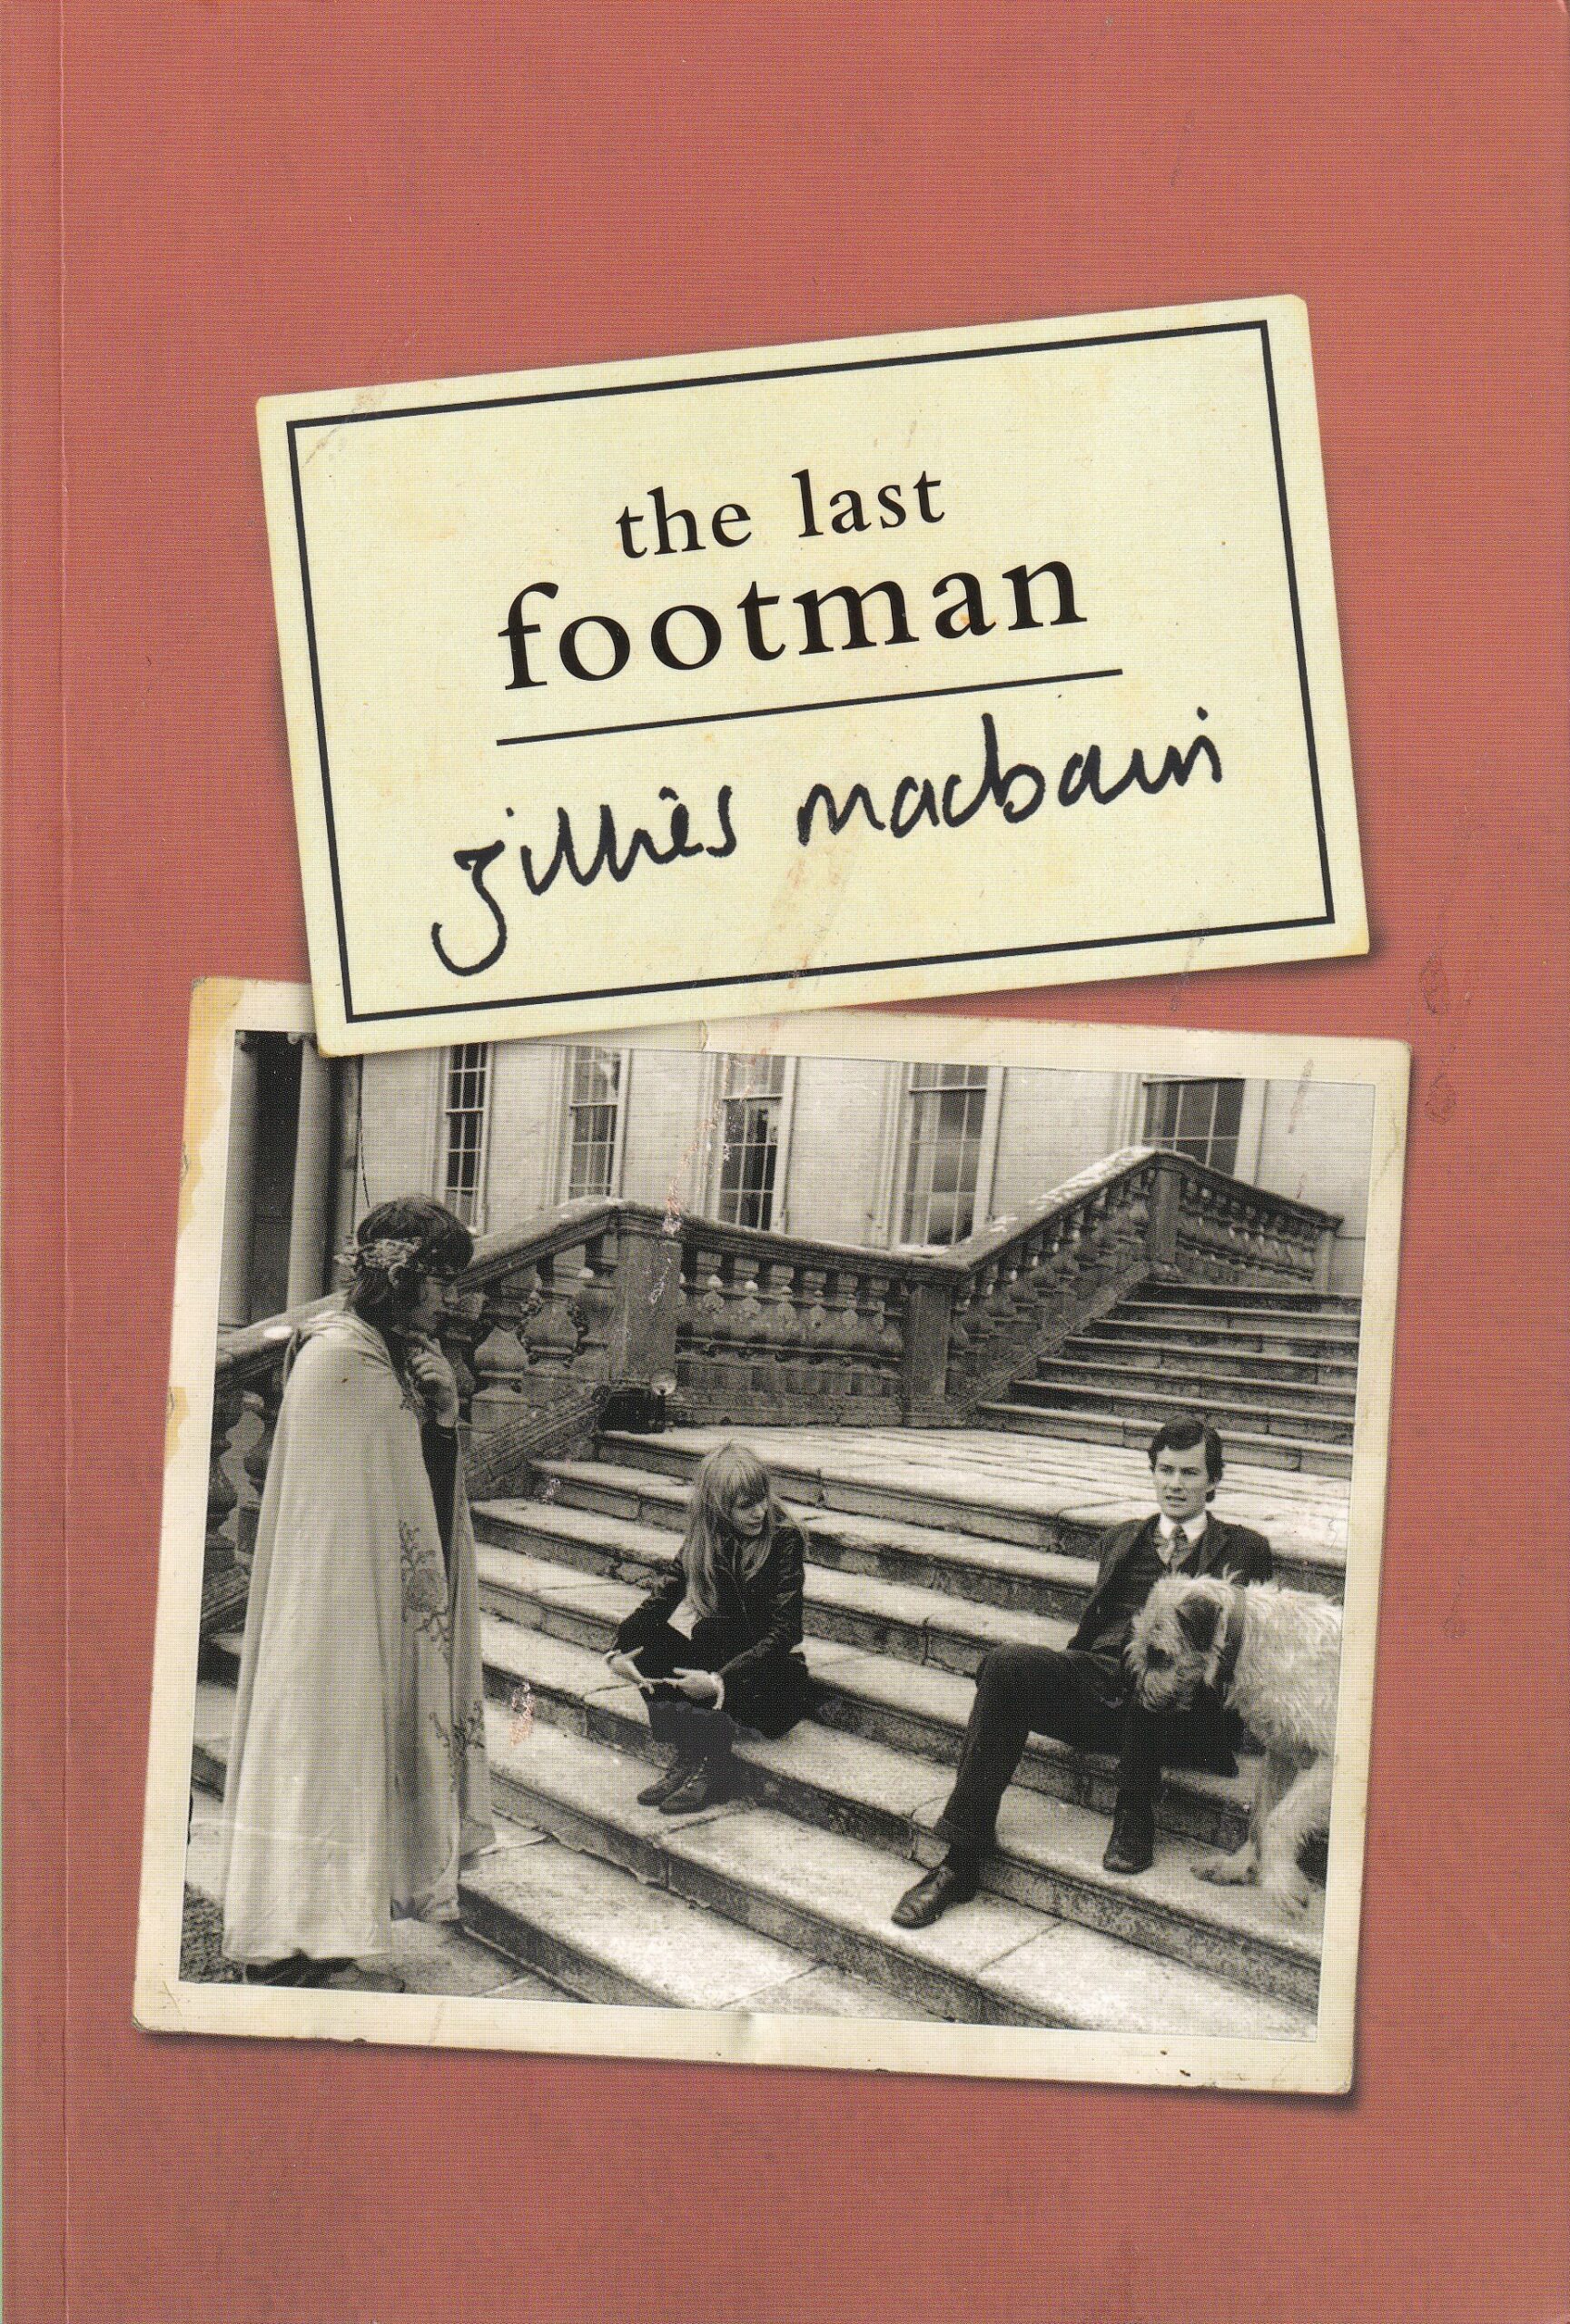 The Last Footman-Signed Copy by Gillies Macbain